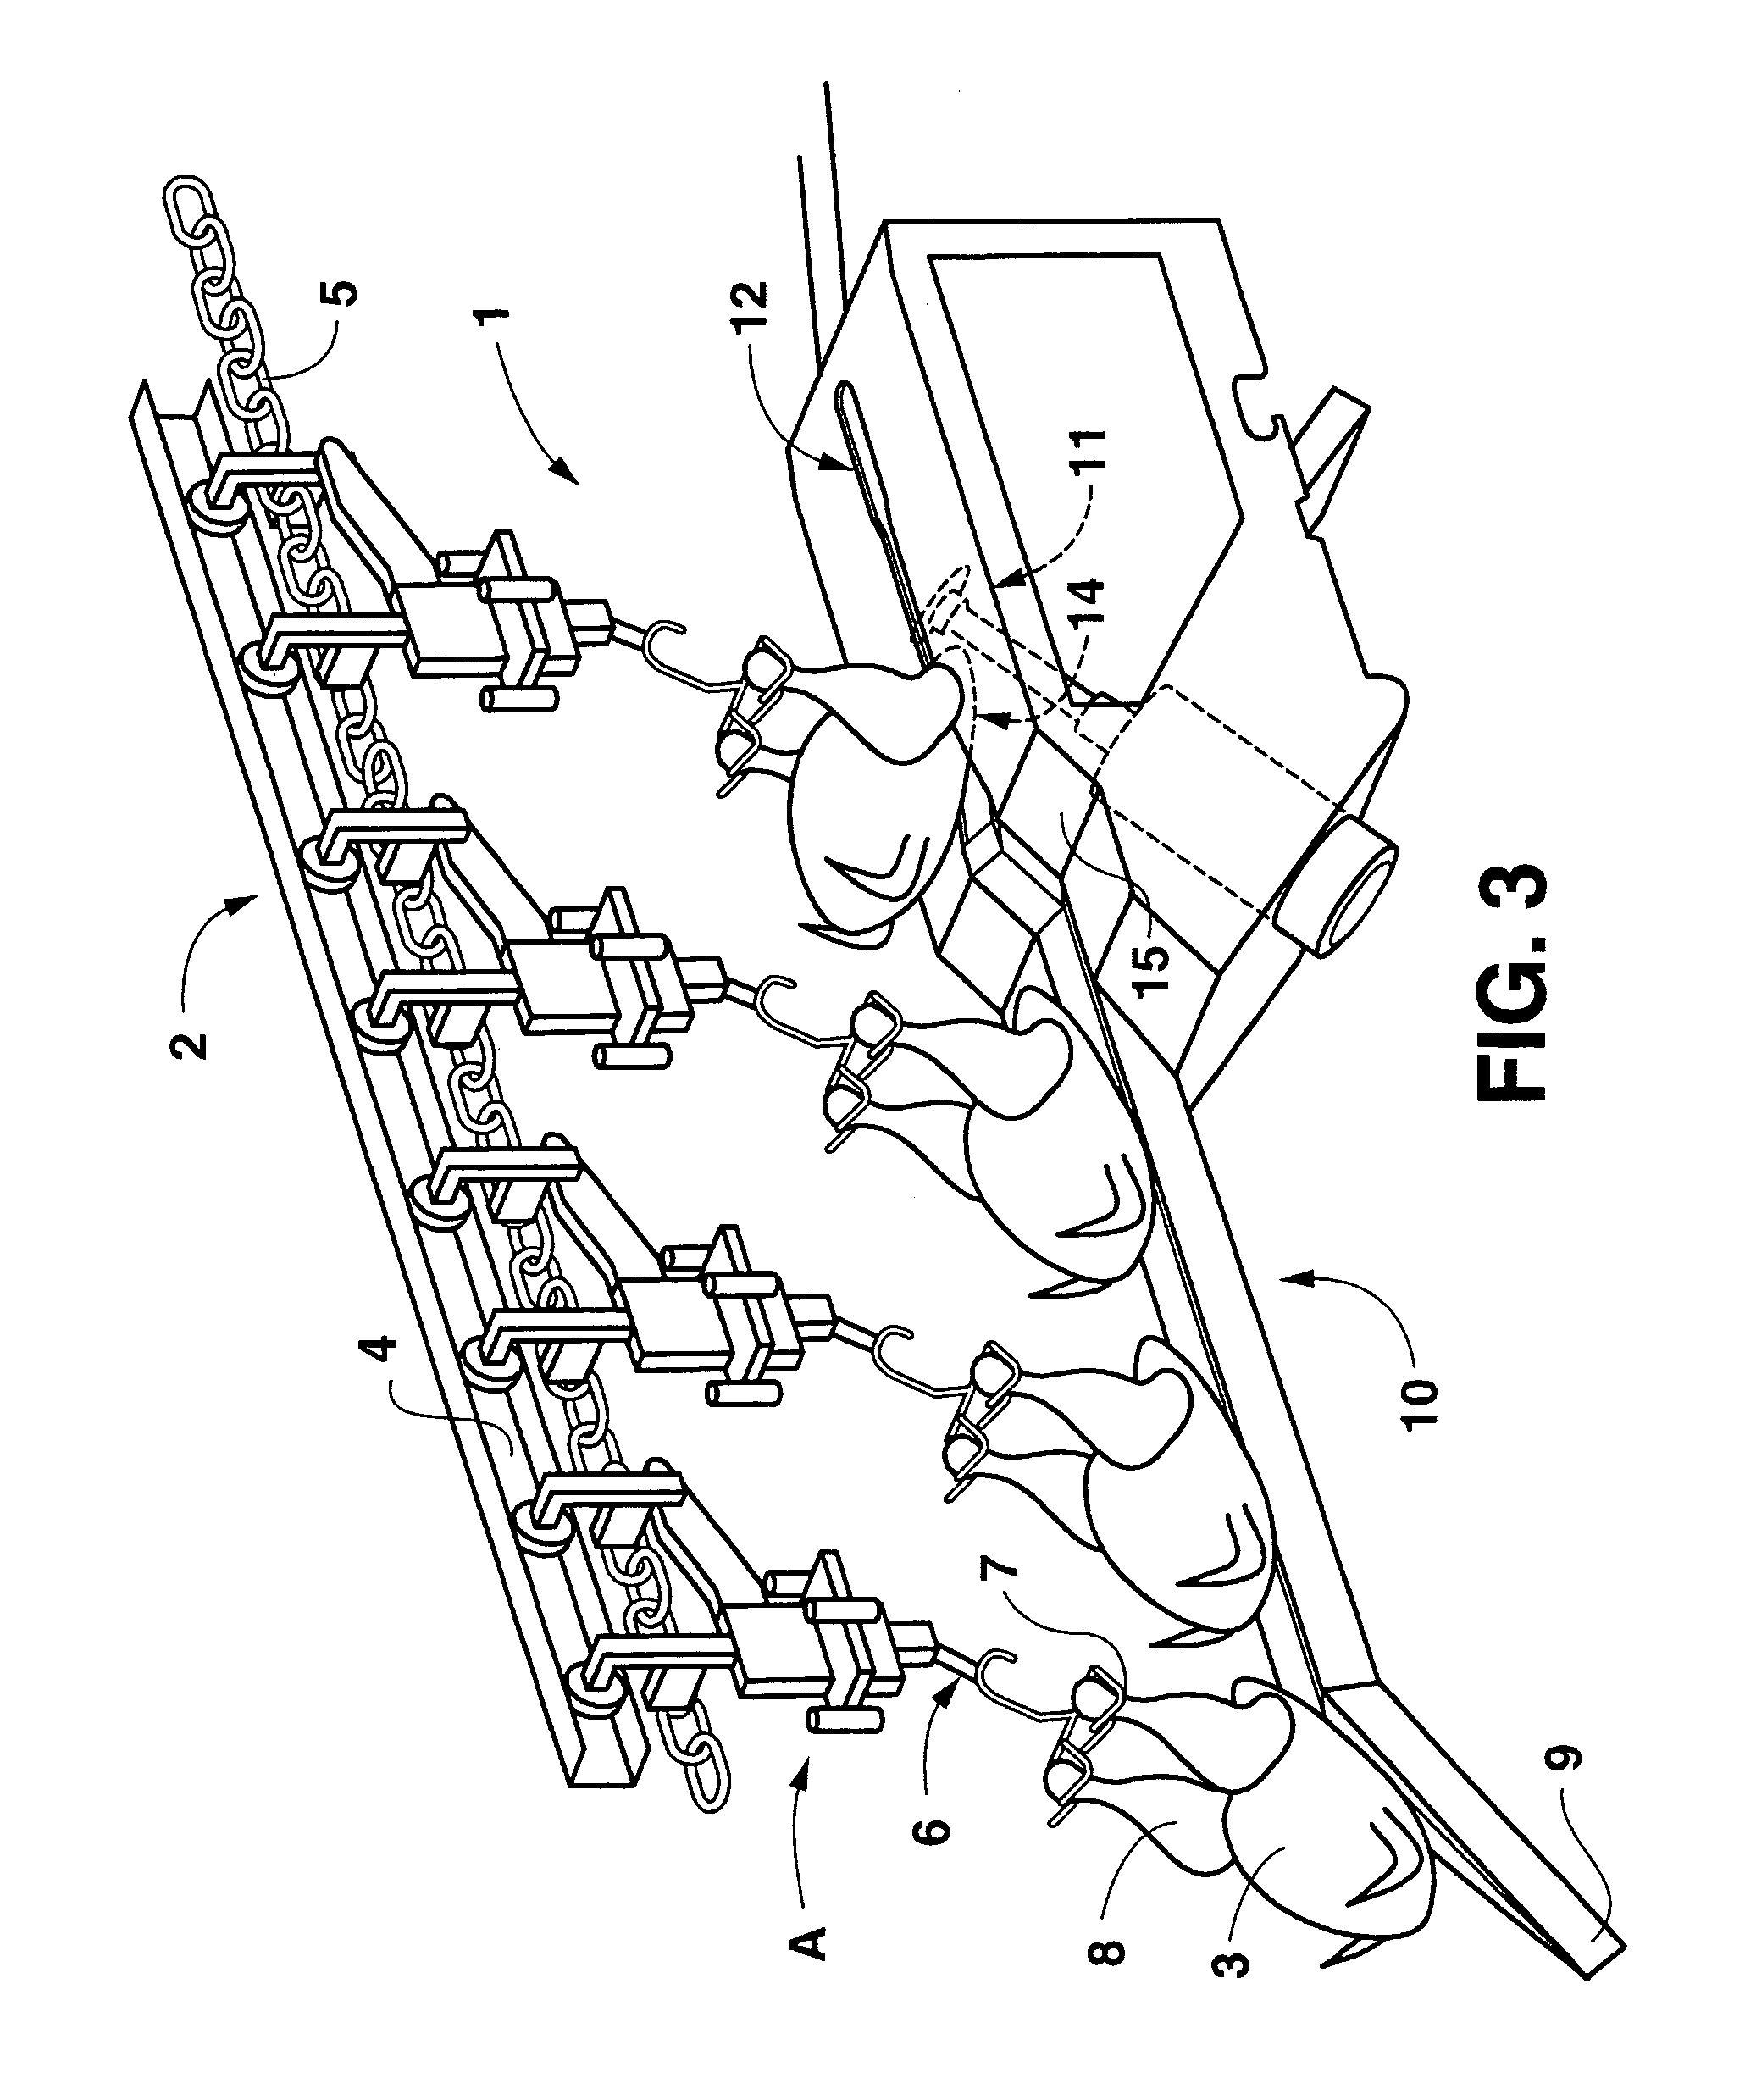 Apparatus for automatically removing a tail from poultry